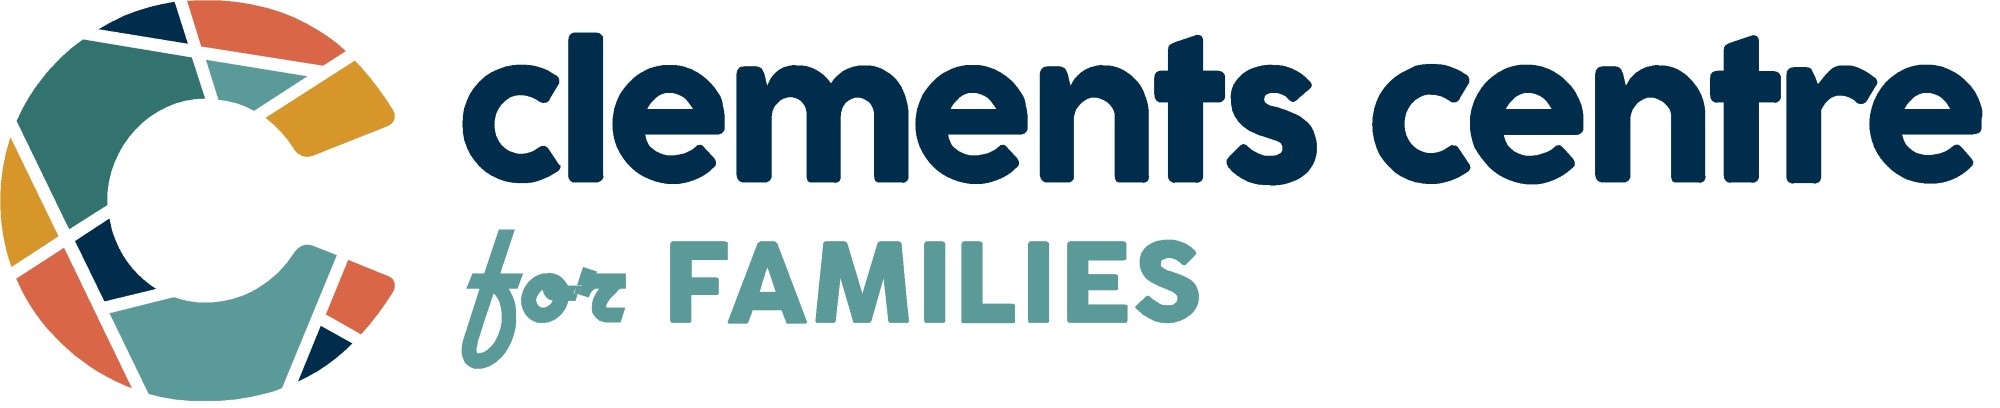 Logo: clements centre for FAMILIES. Thick letter "C" containing multiple shapes, each either teal, orange, yellow and dark blue.